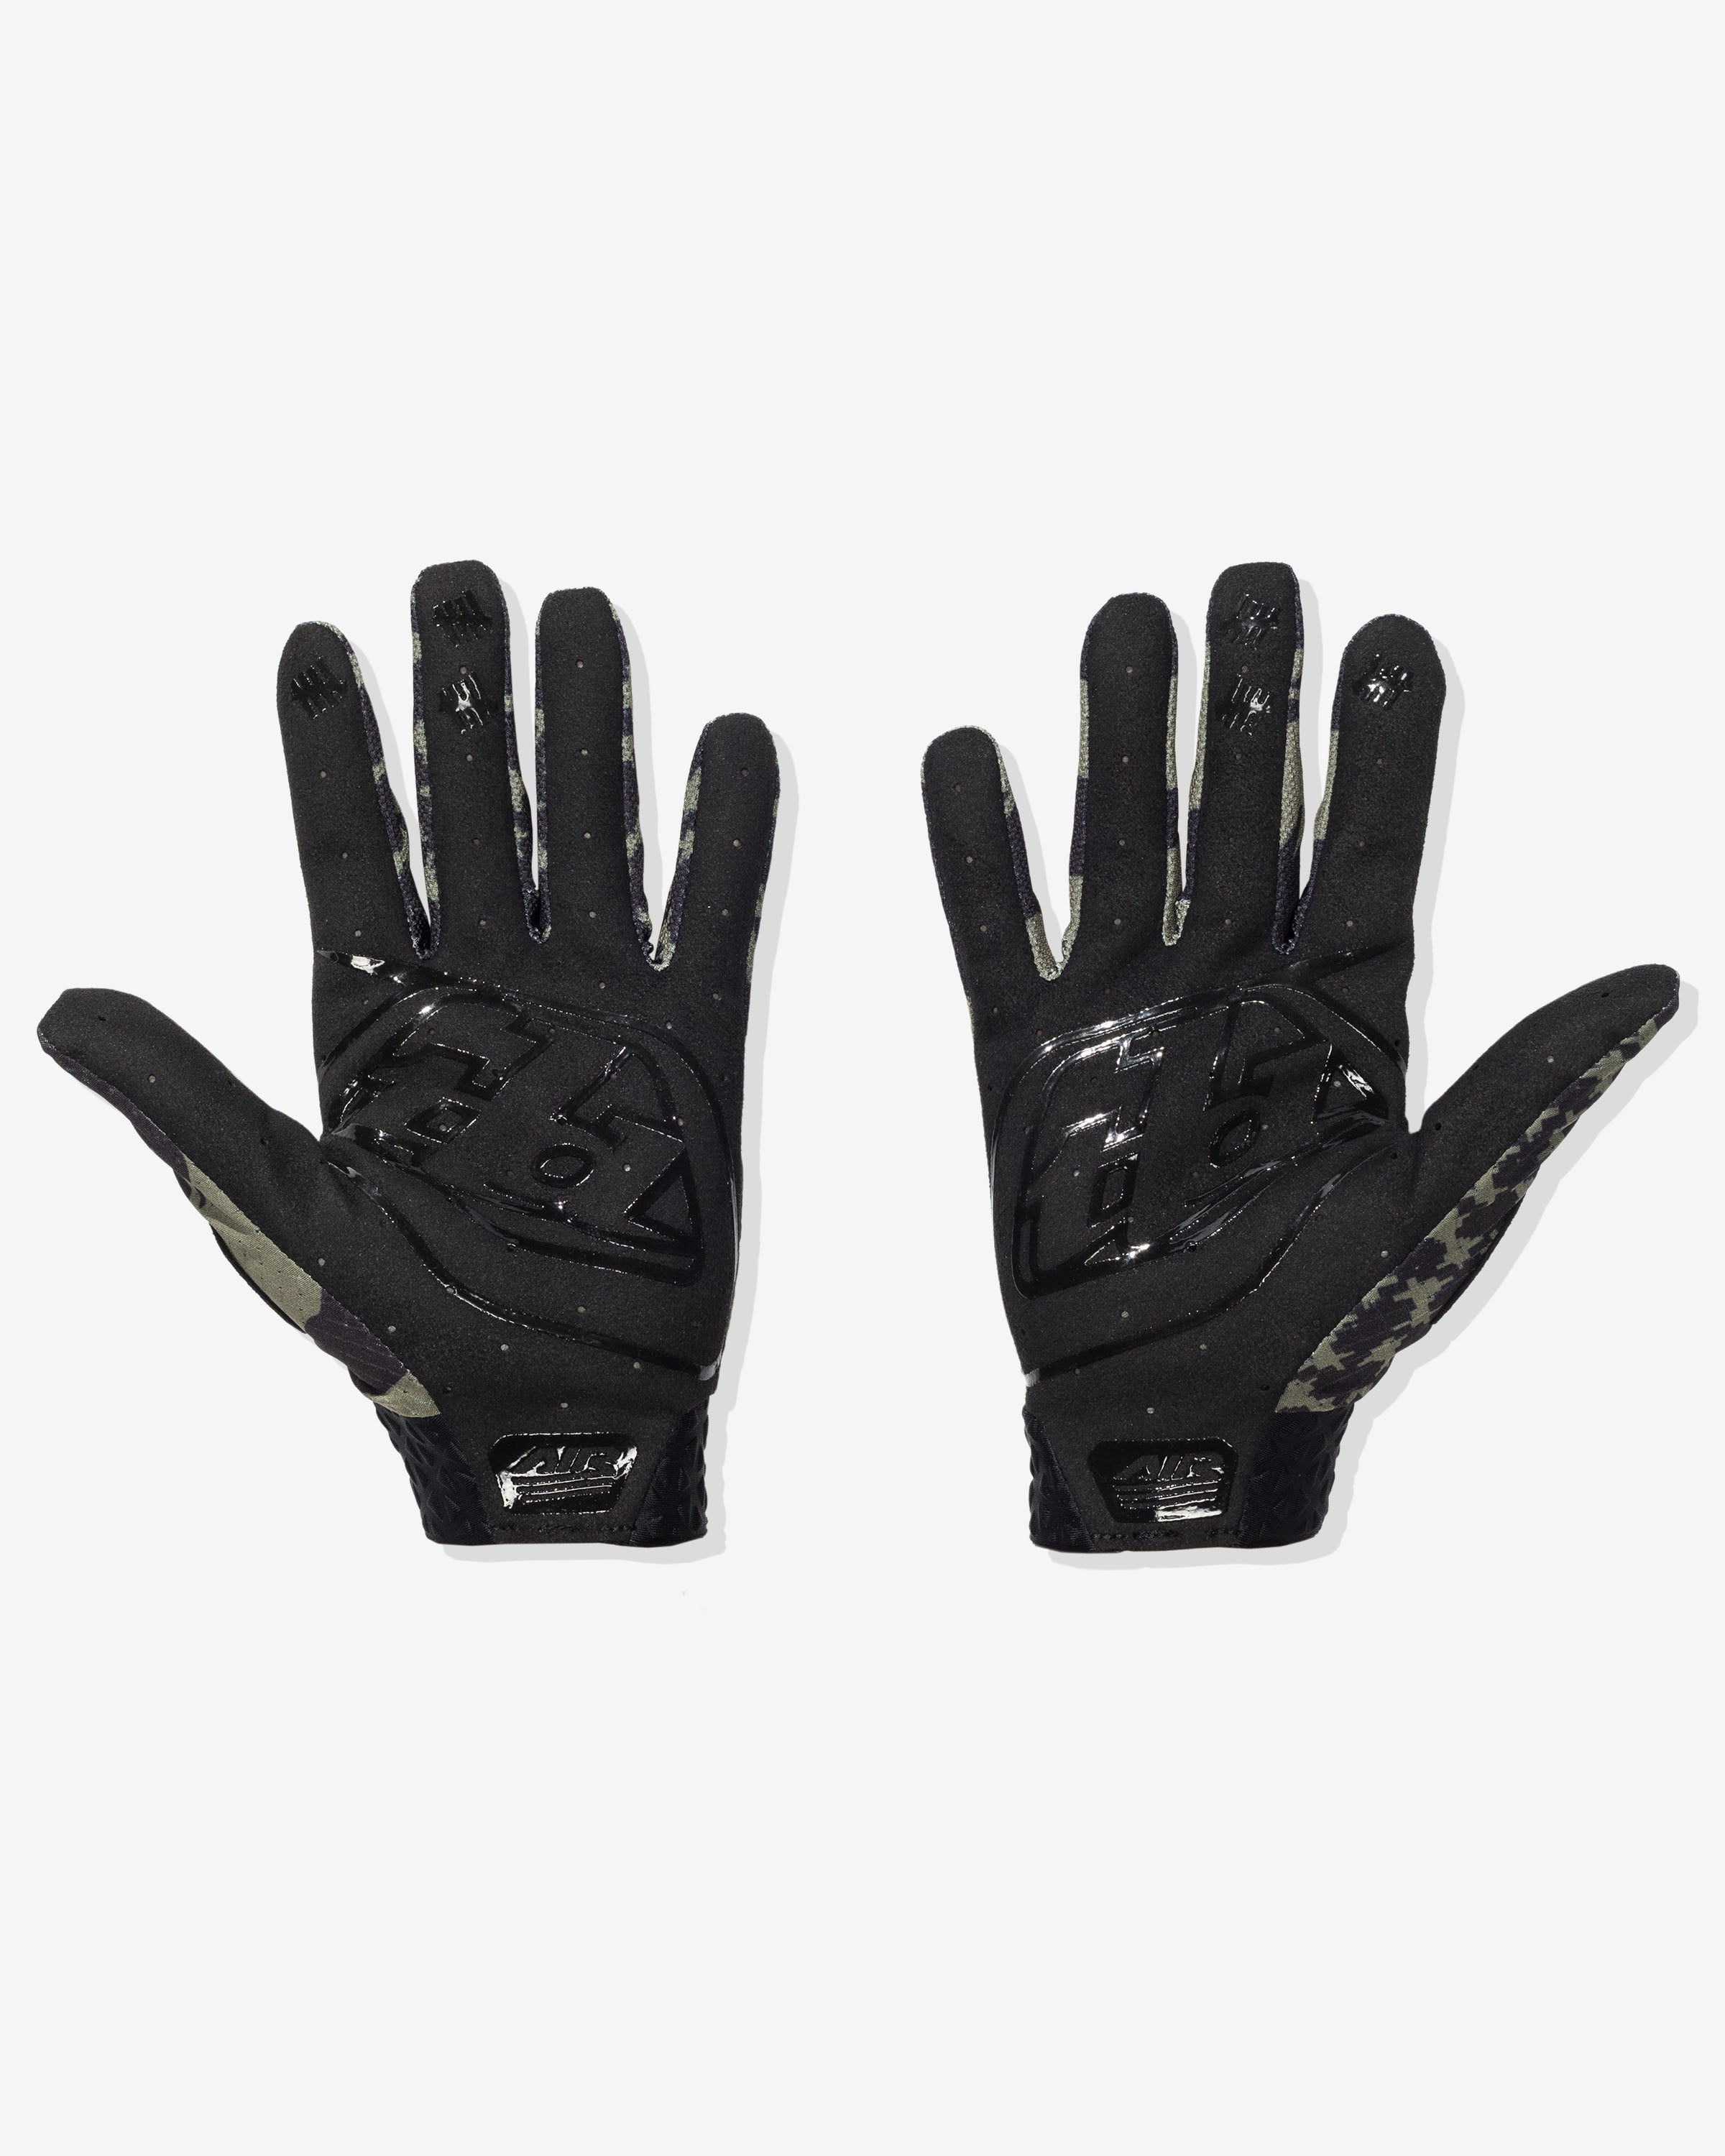 UNDEFEATED X TROY LEE DESIGNS SE AIR GLOVES - MULTI